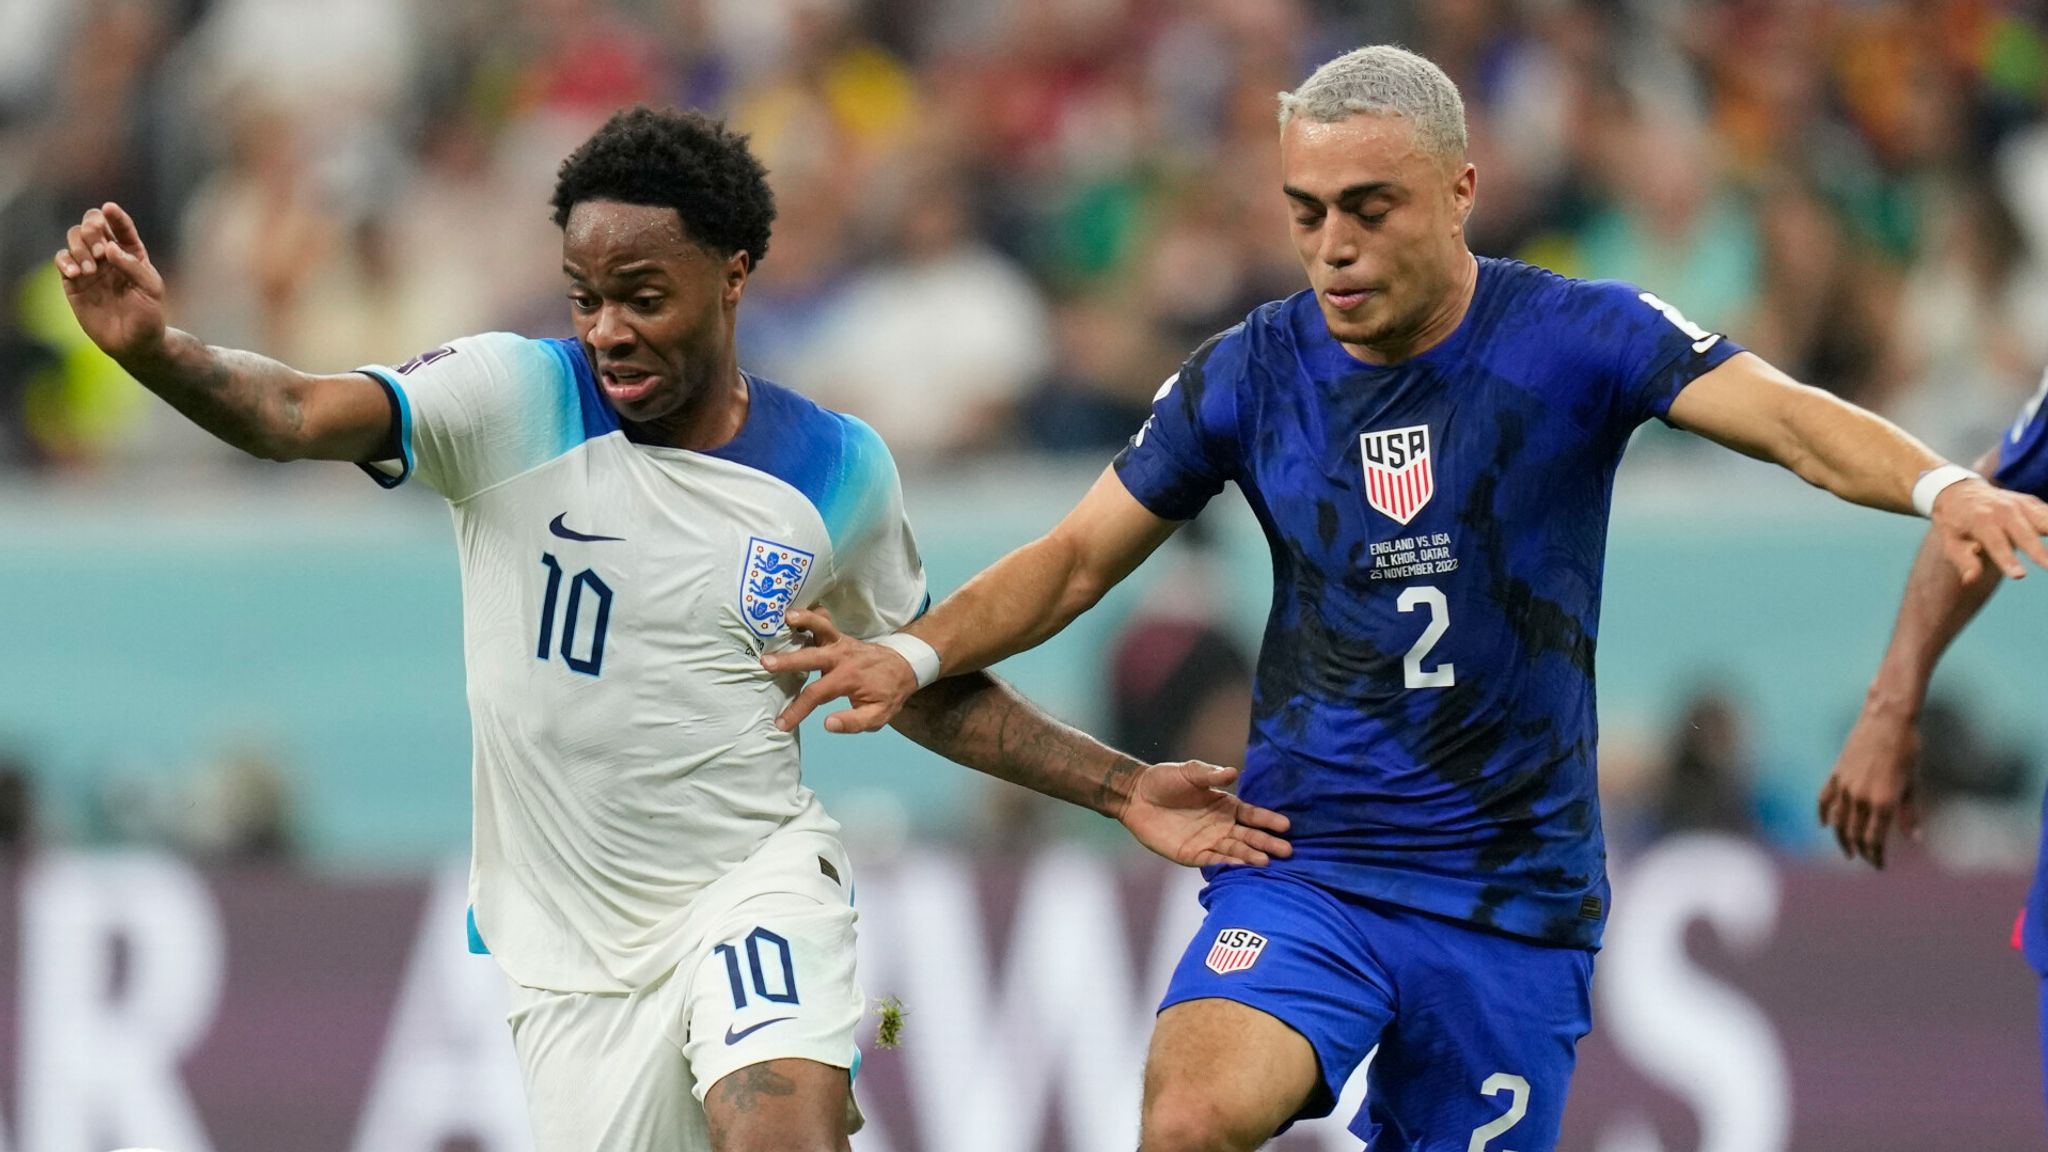 England 0-0 USA: Three Lions lack intensity in goalless draw with